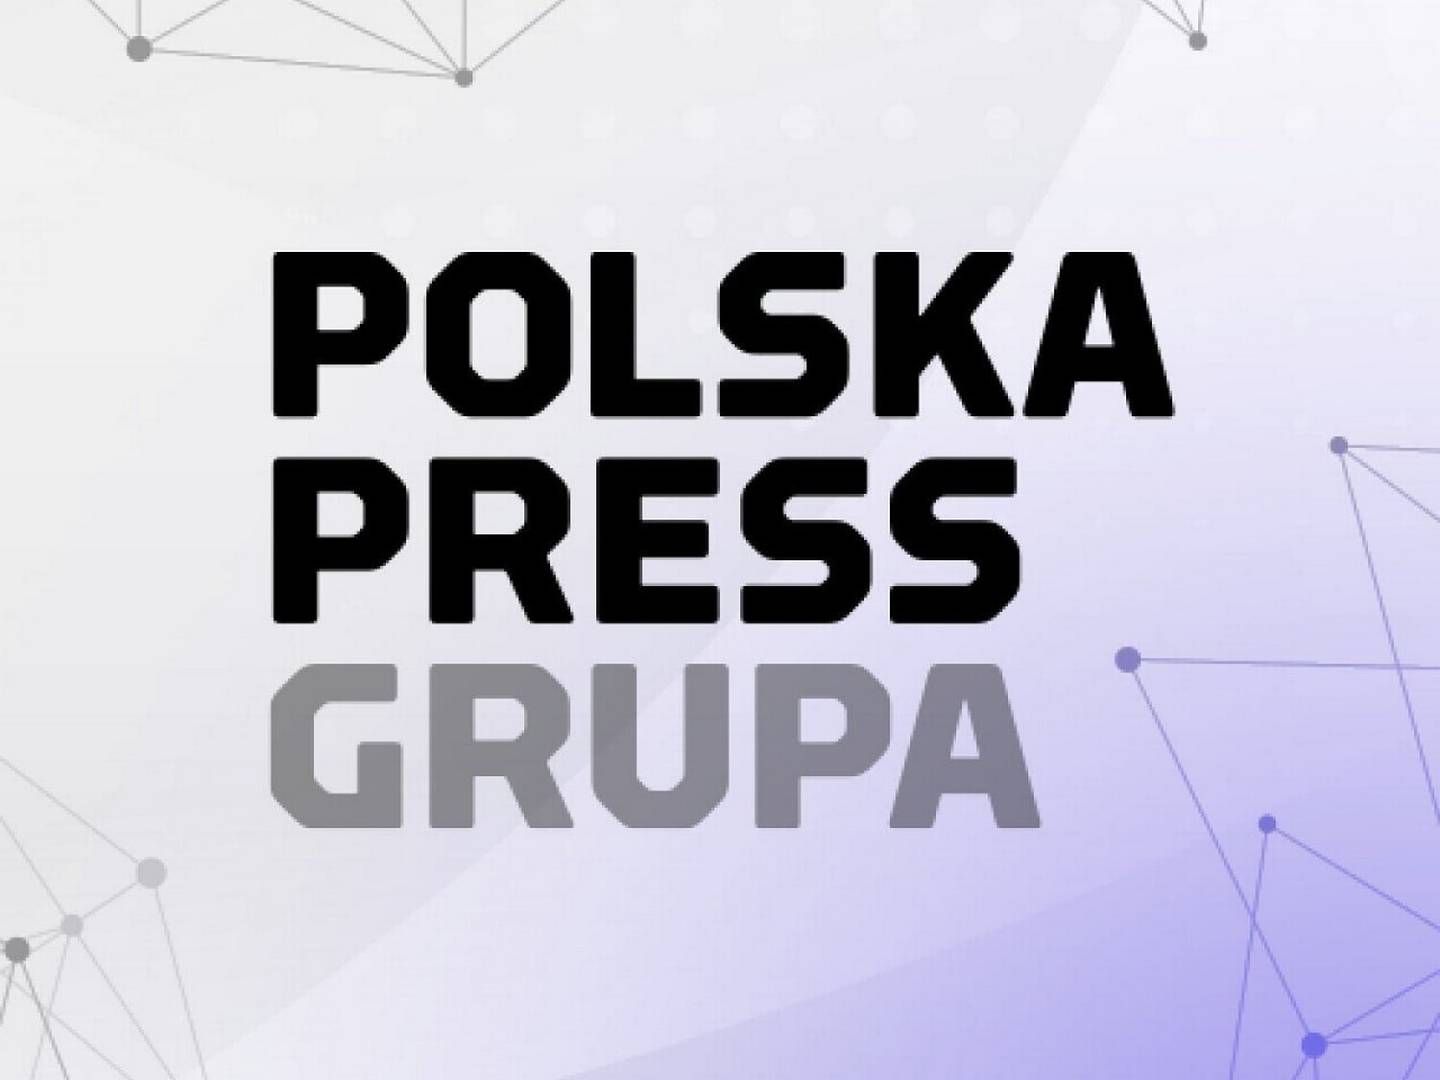 The Norwegian oil fund's Council on Ethics believes that press freedom in Poland may be under threat due to the acquisition of news publisher Polska Press. | Photo: Polska Press